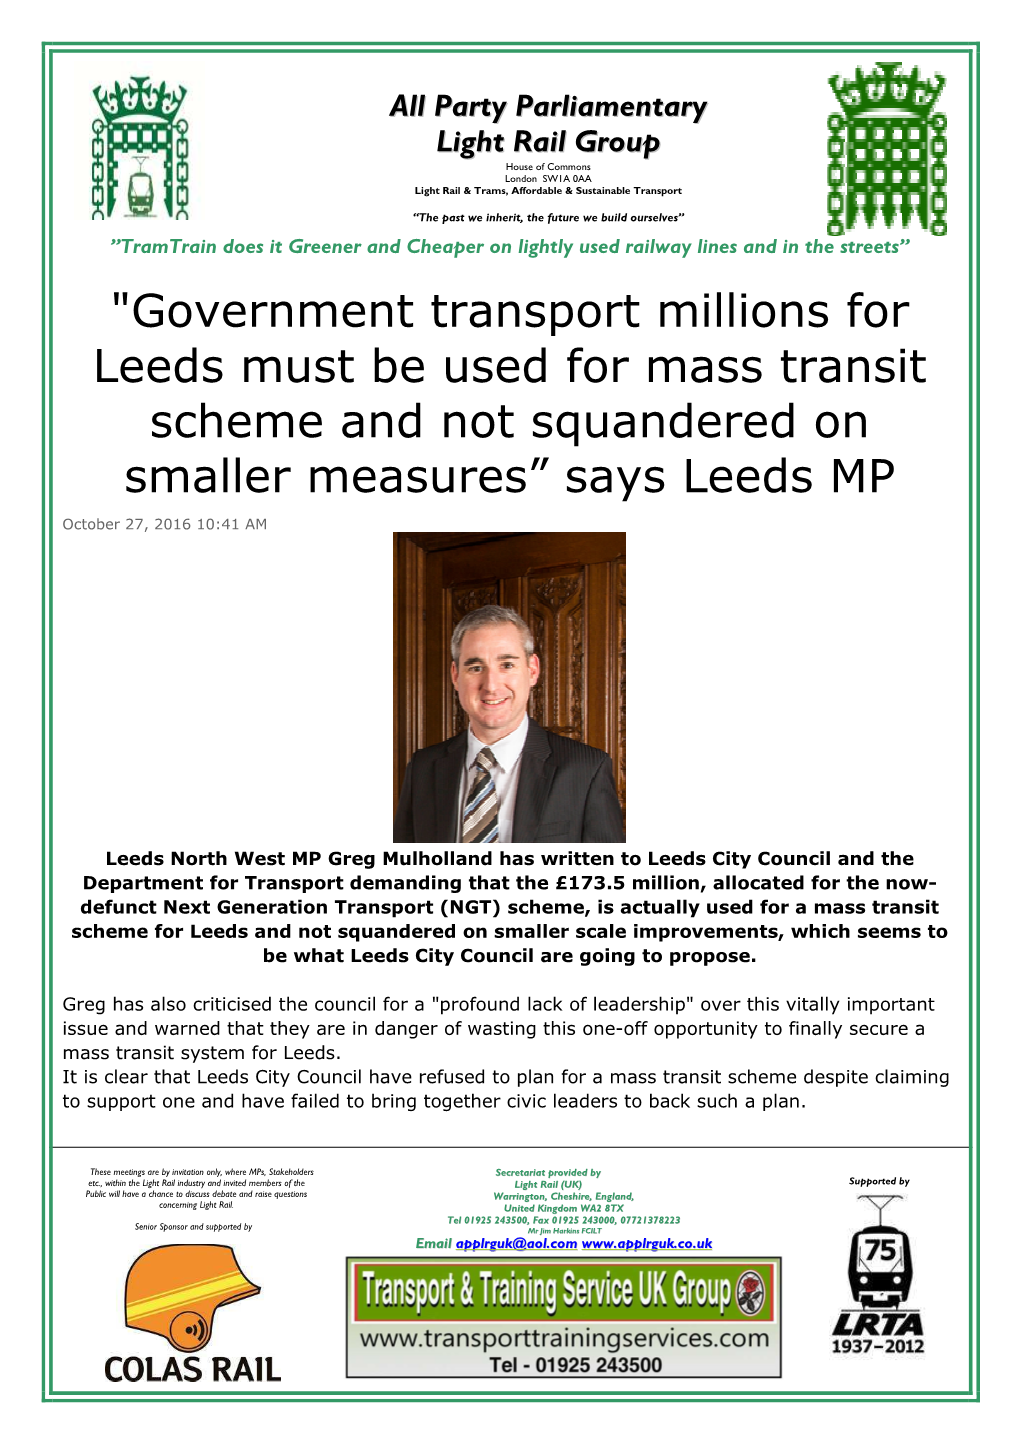 "Government Transport Millions for Leeds Must Be Used for Mass Transit Scheme and Not Squandered on Smaller Measures” Says Leeds MP